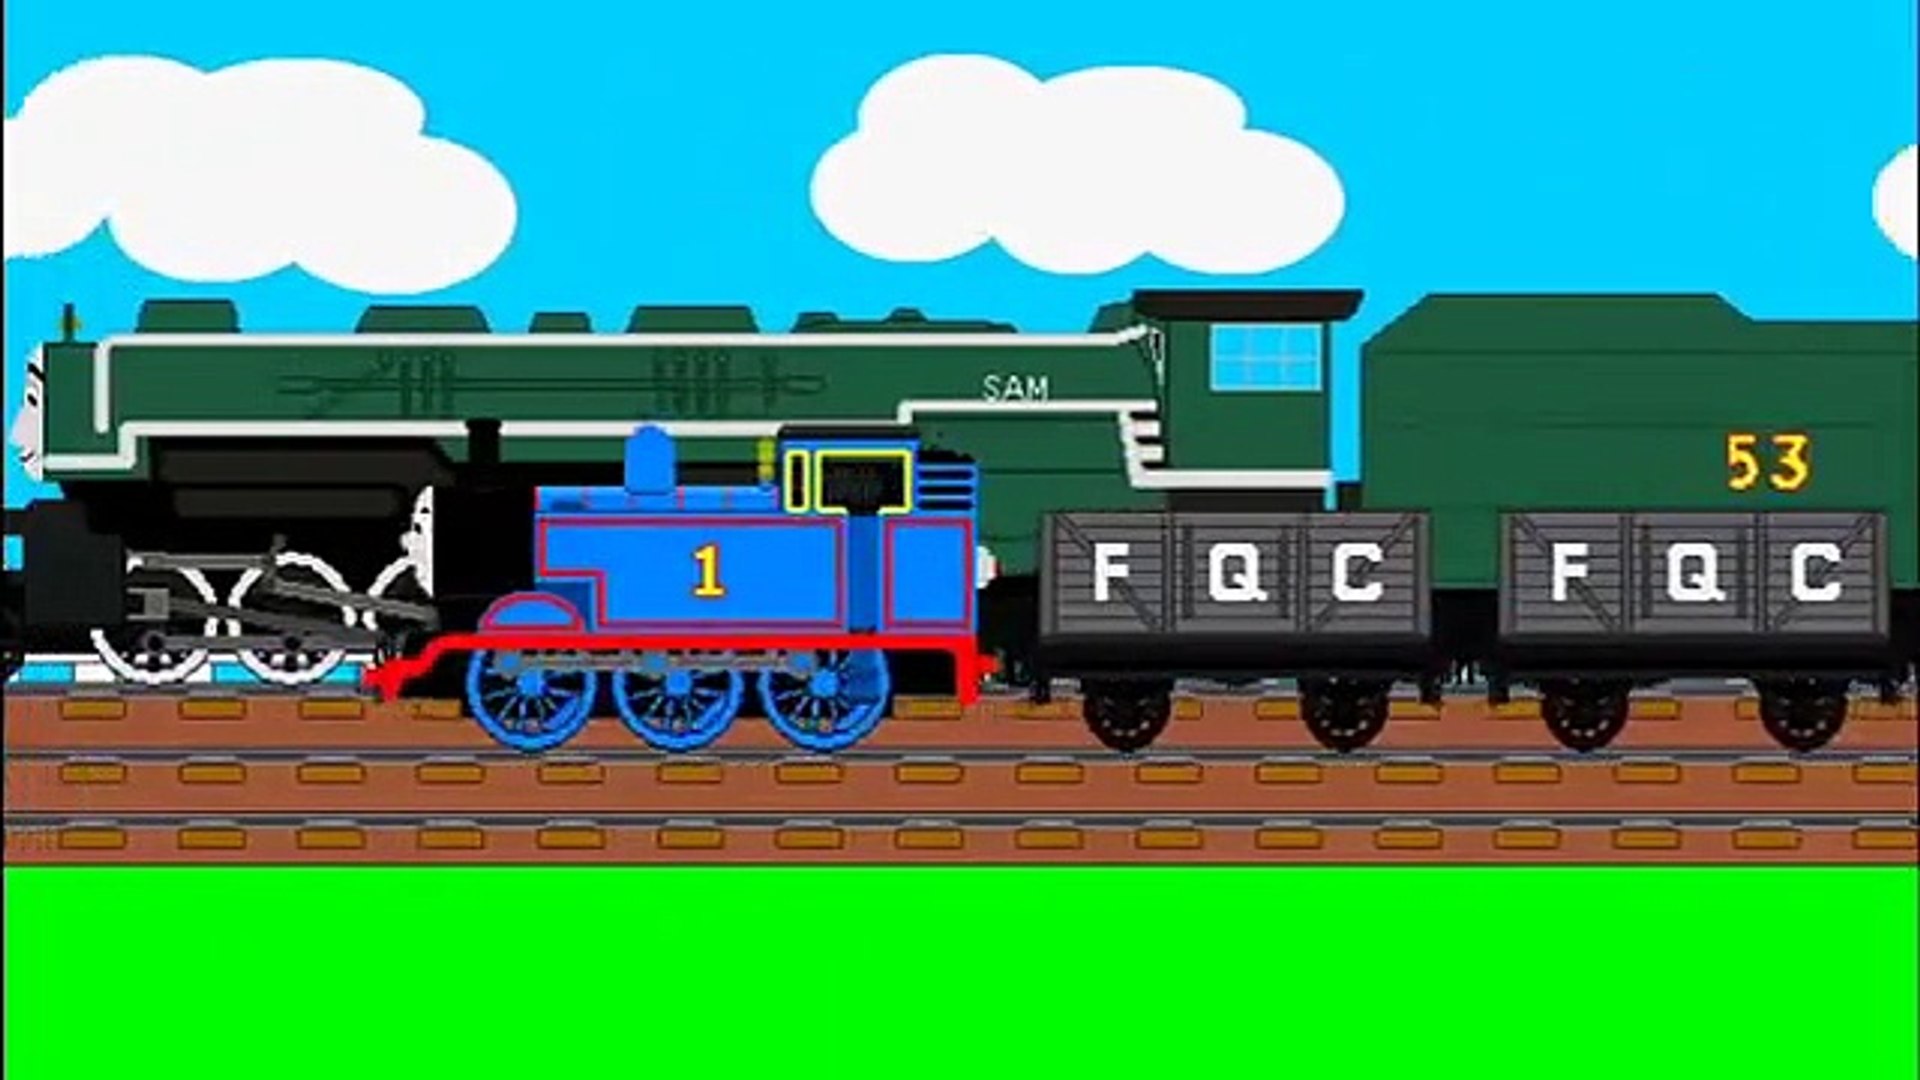 A New Friend on Sodor Thomas and Friends Animated Short - Dailymotion Video